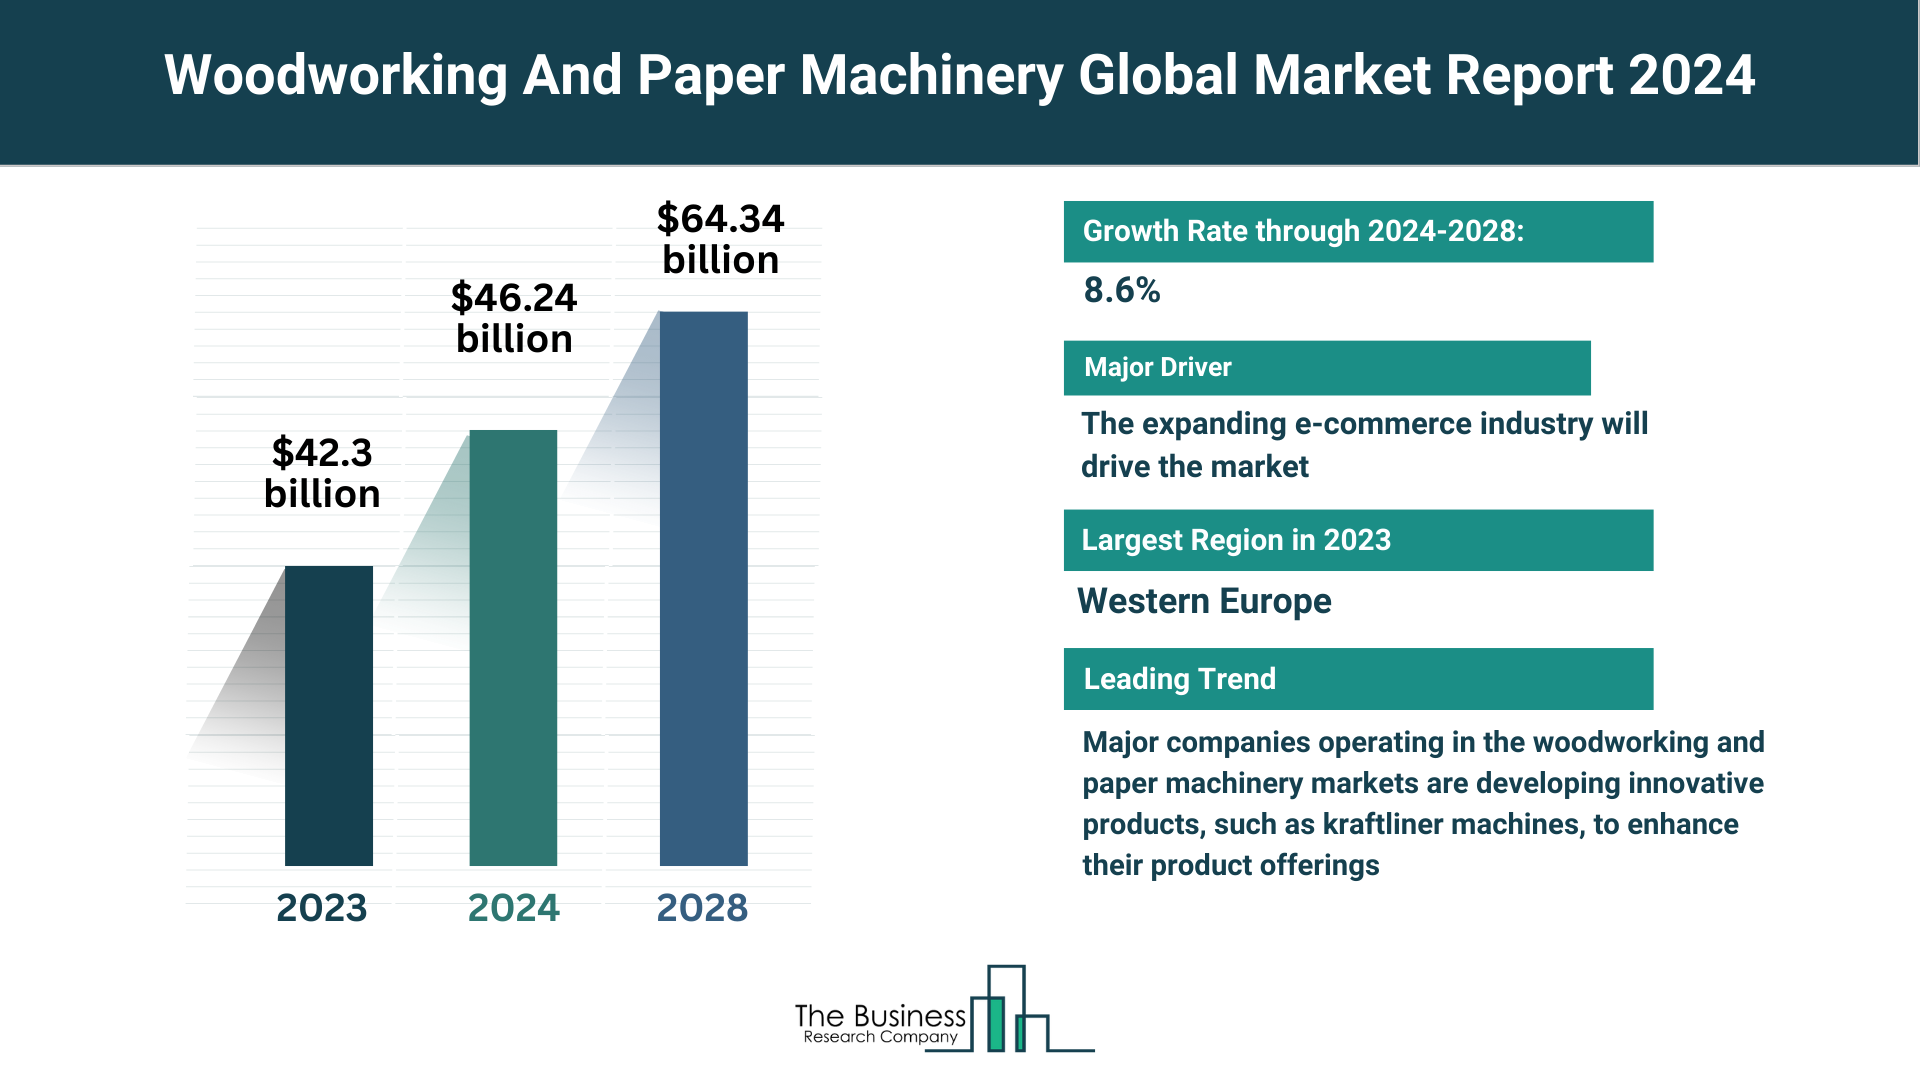 5 Major Insights Into The Woodworking And Paper Machinery Market Report 2024